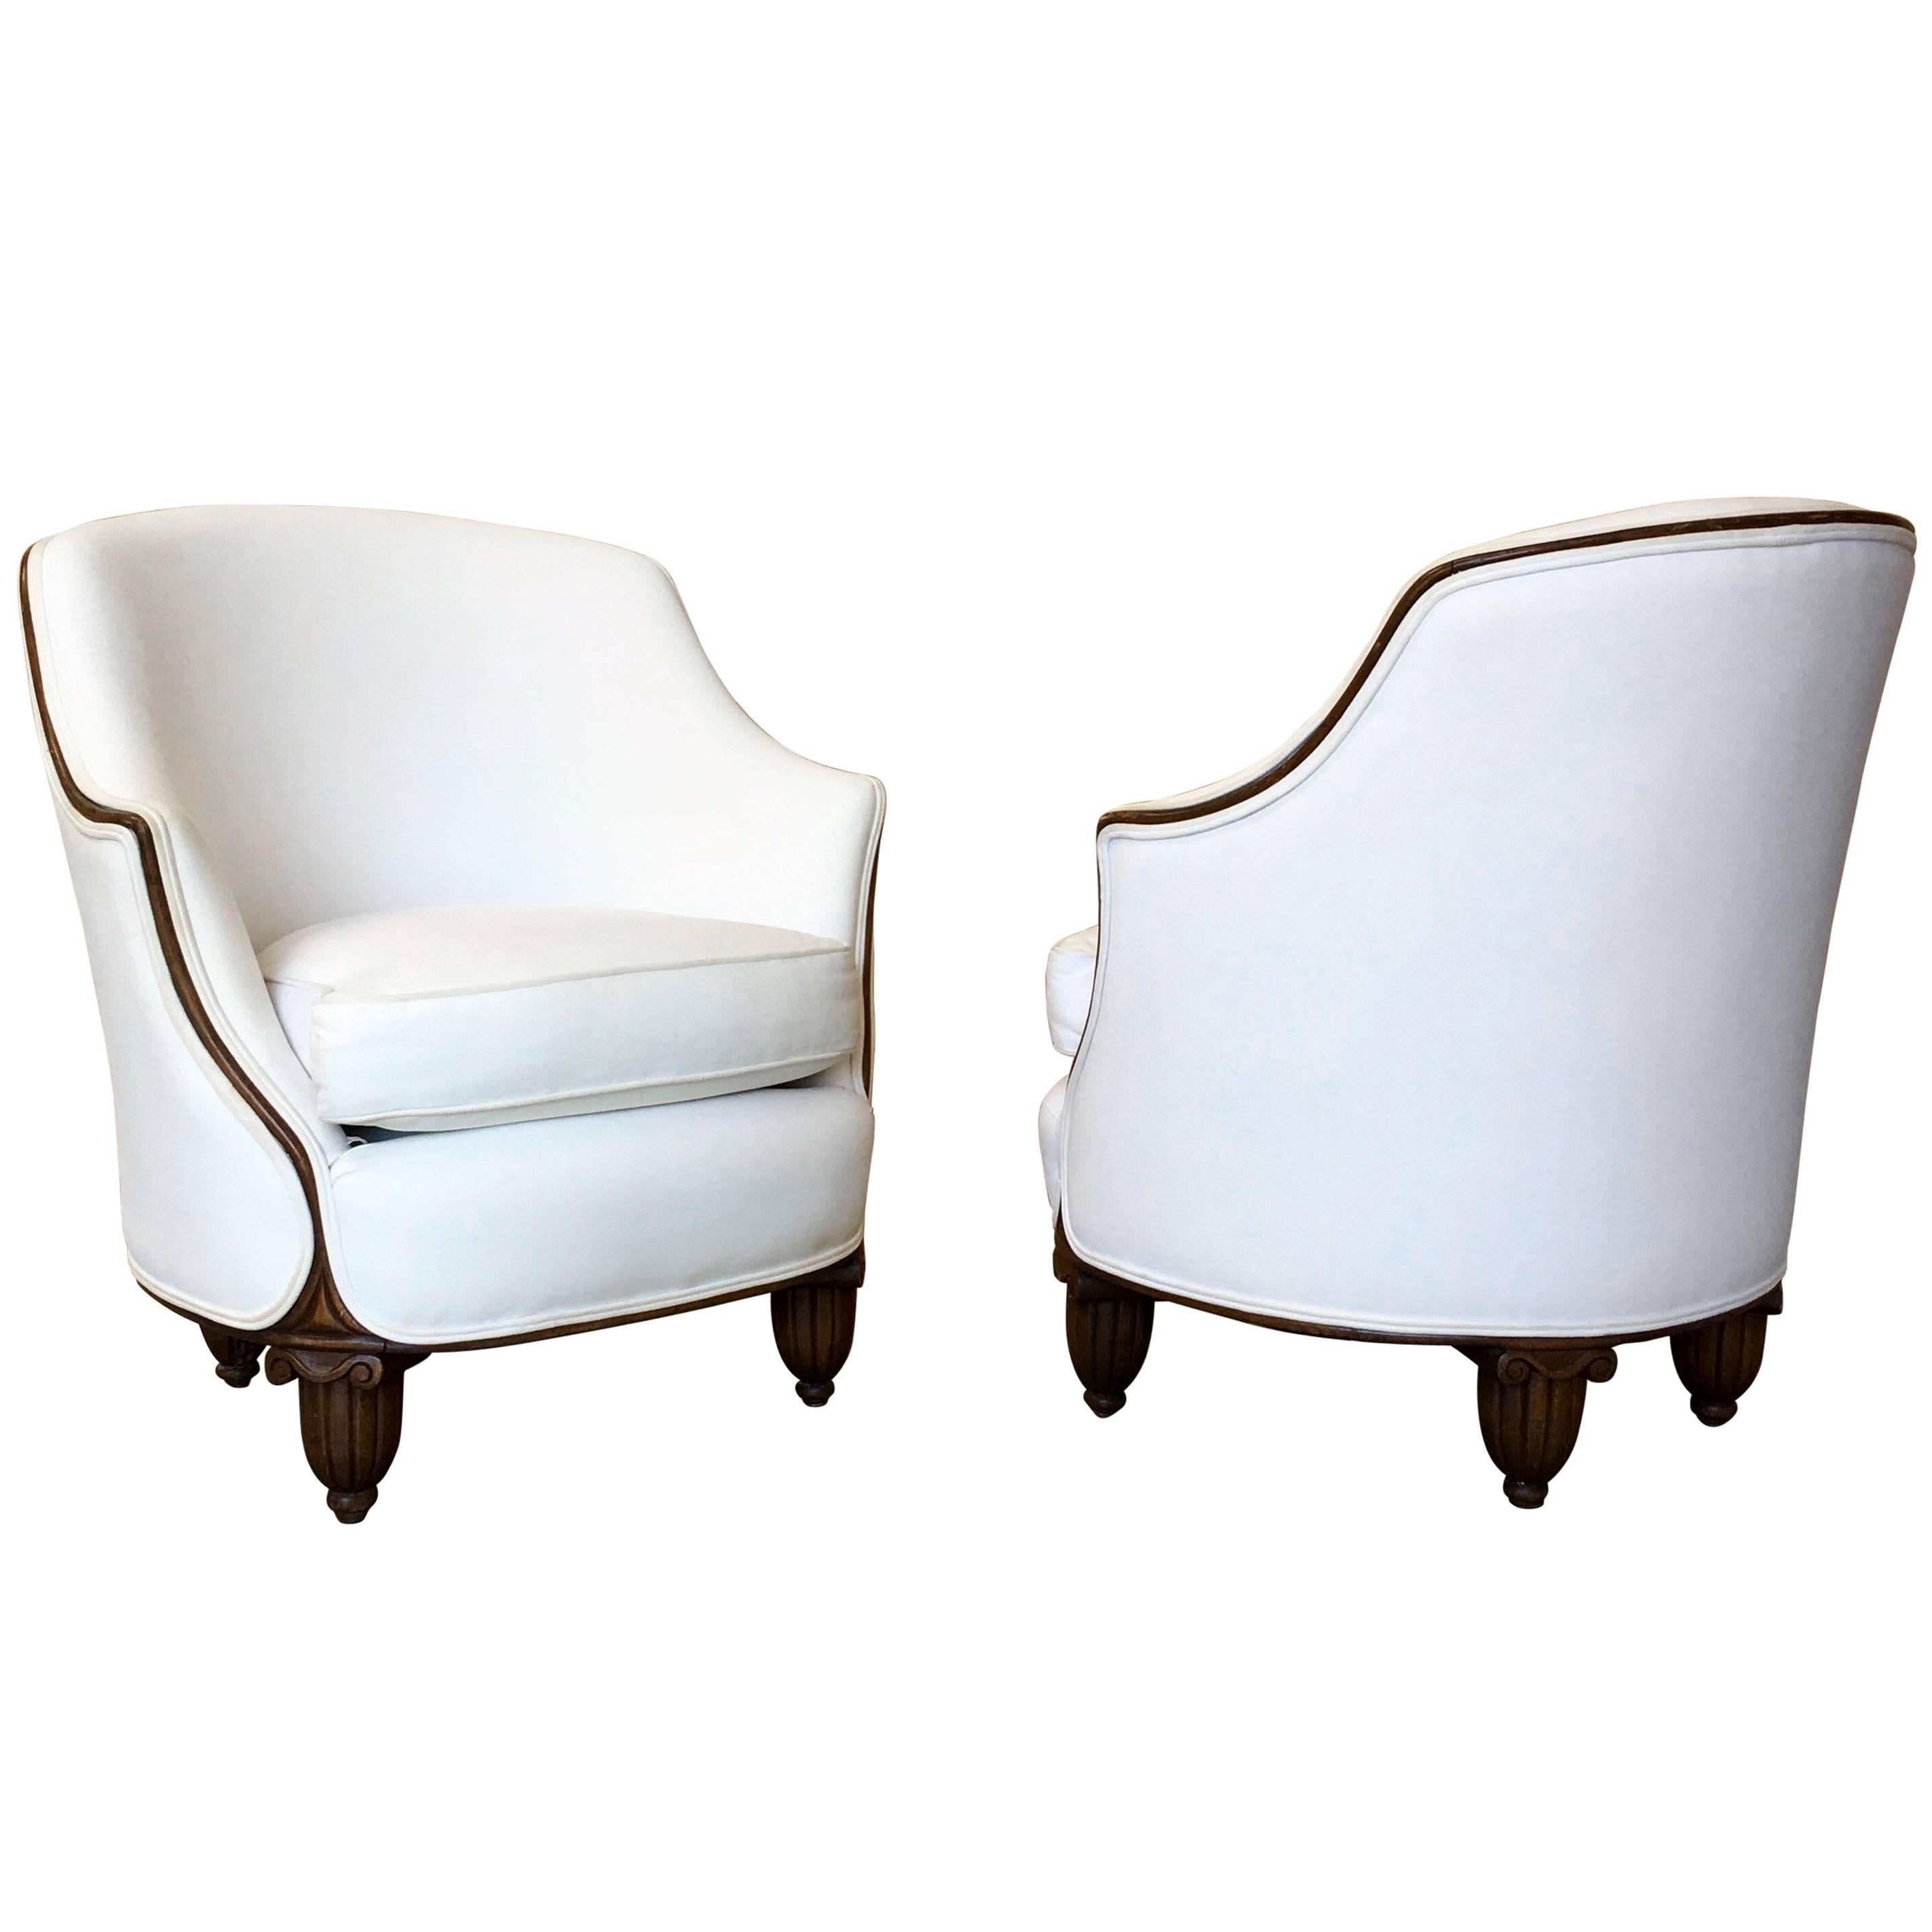 Pair of Art Deco Lounge Chairs